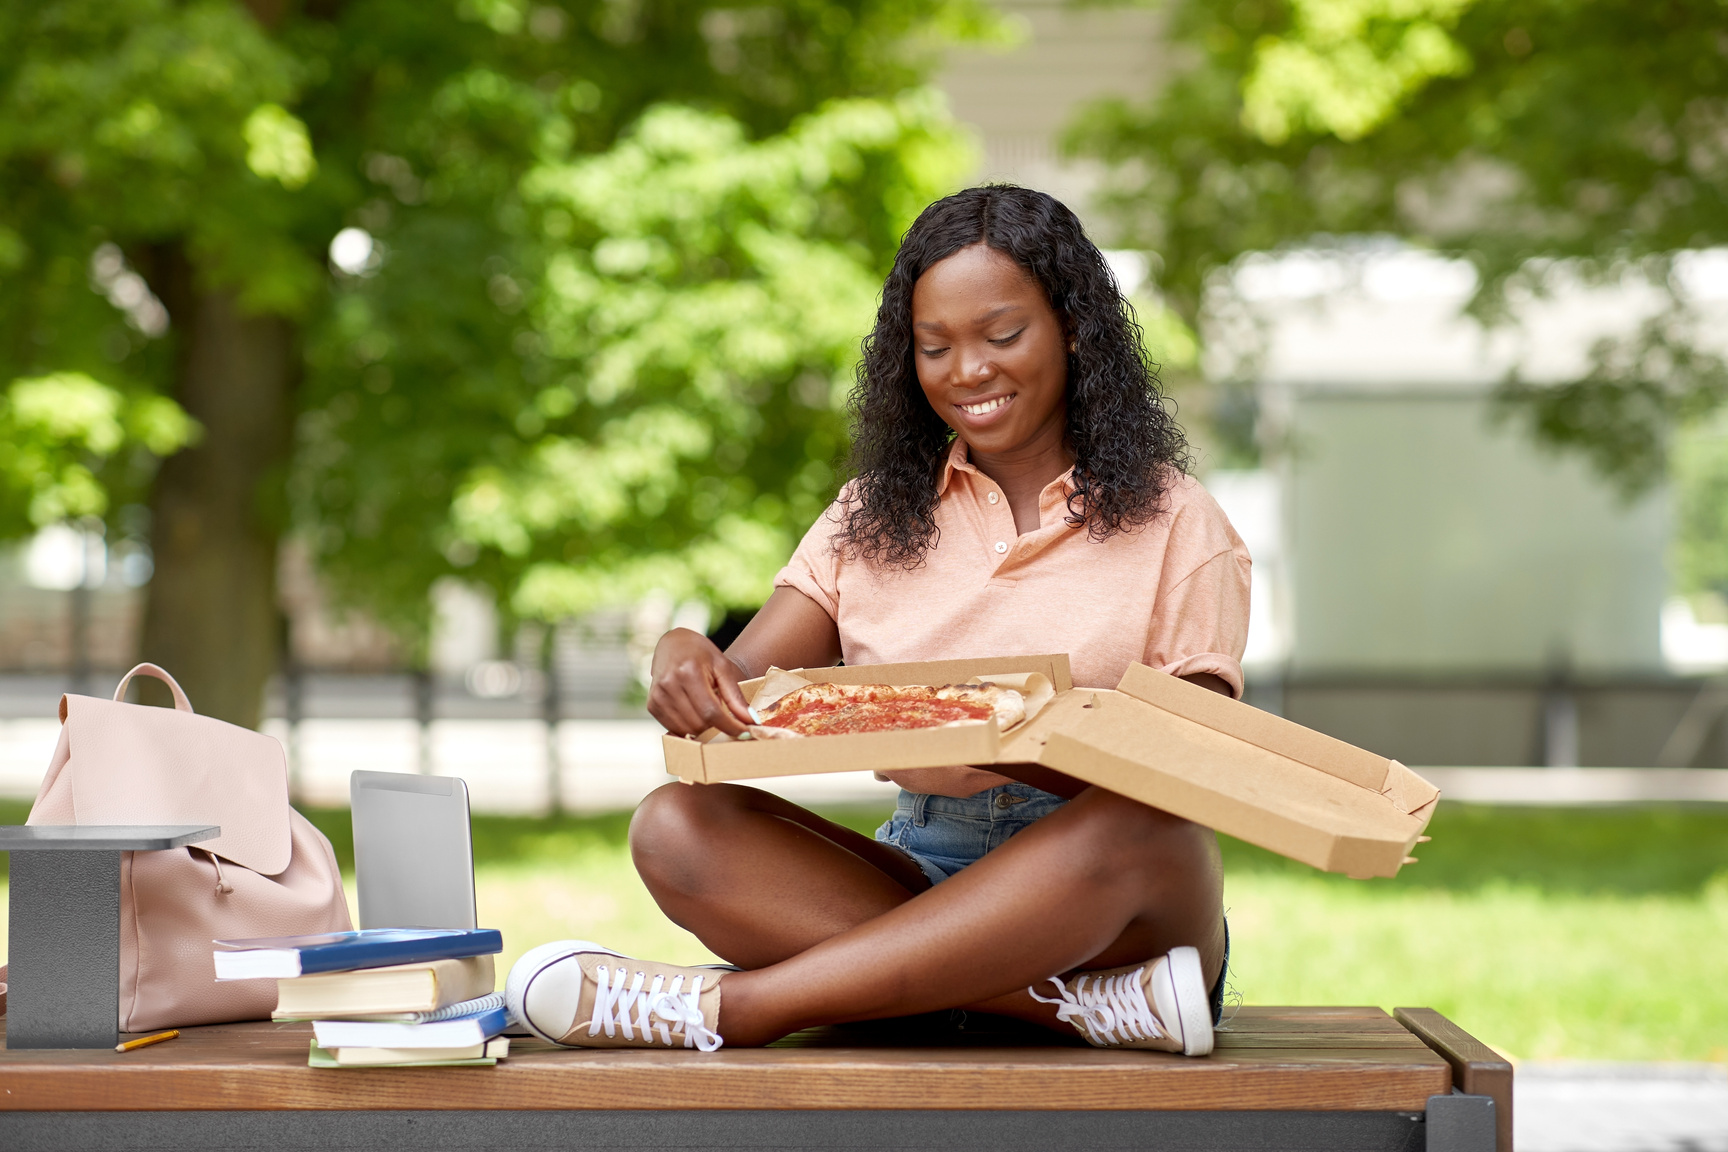 African Student Girl Eating Takeaway Pizza in City